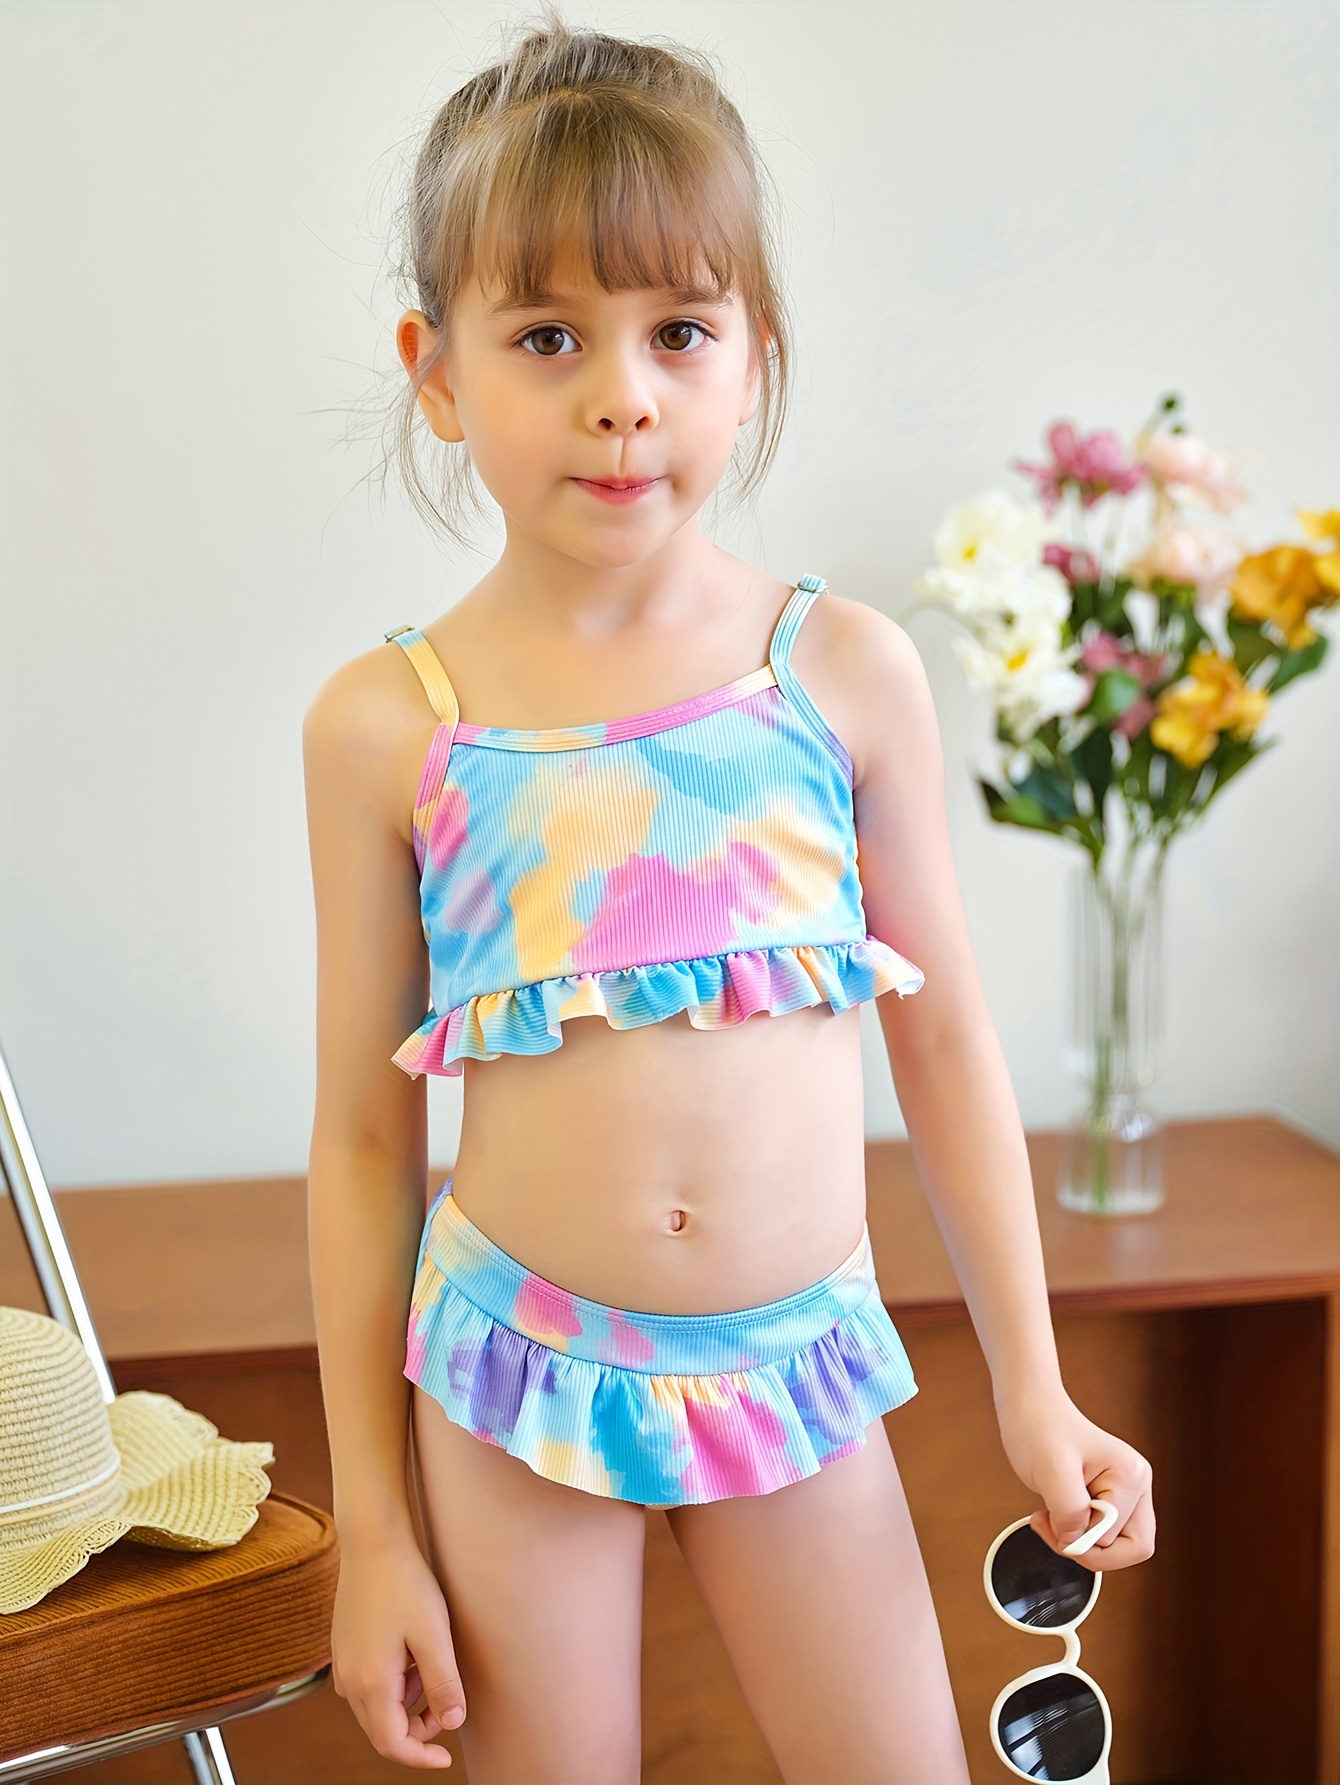 Kids Girls Floral Print Swimsuits Two-Pieces Teens Bathing Suits Padded  Cami Top And Bikini Bottoms Swimwear Children Tankini Suit 8-12T - buy Kids  Girls Floral Print Swimsuits Two-Pieces Teens Bathing Suits Padded